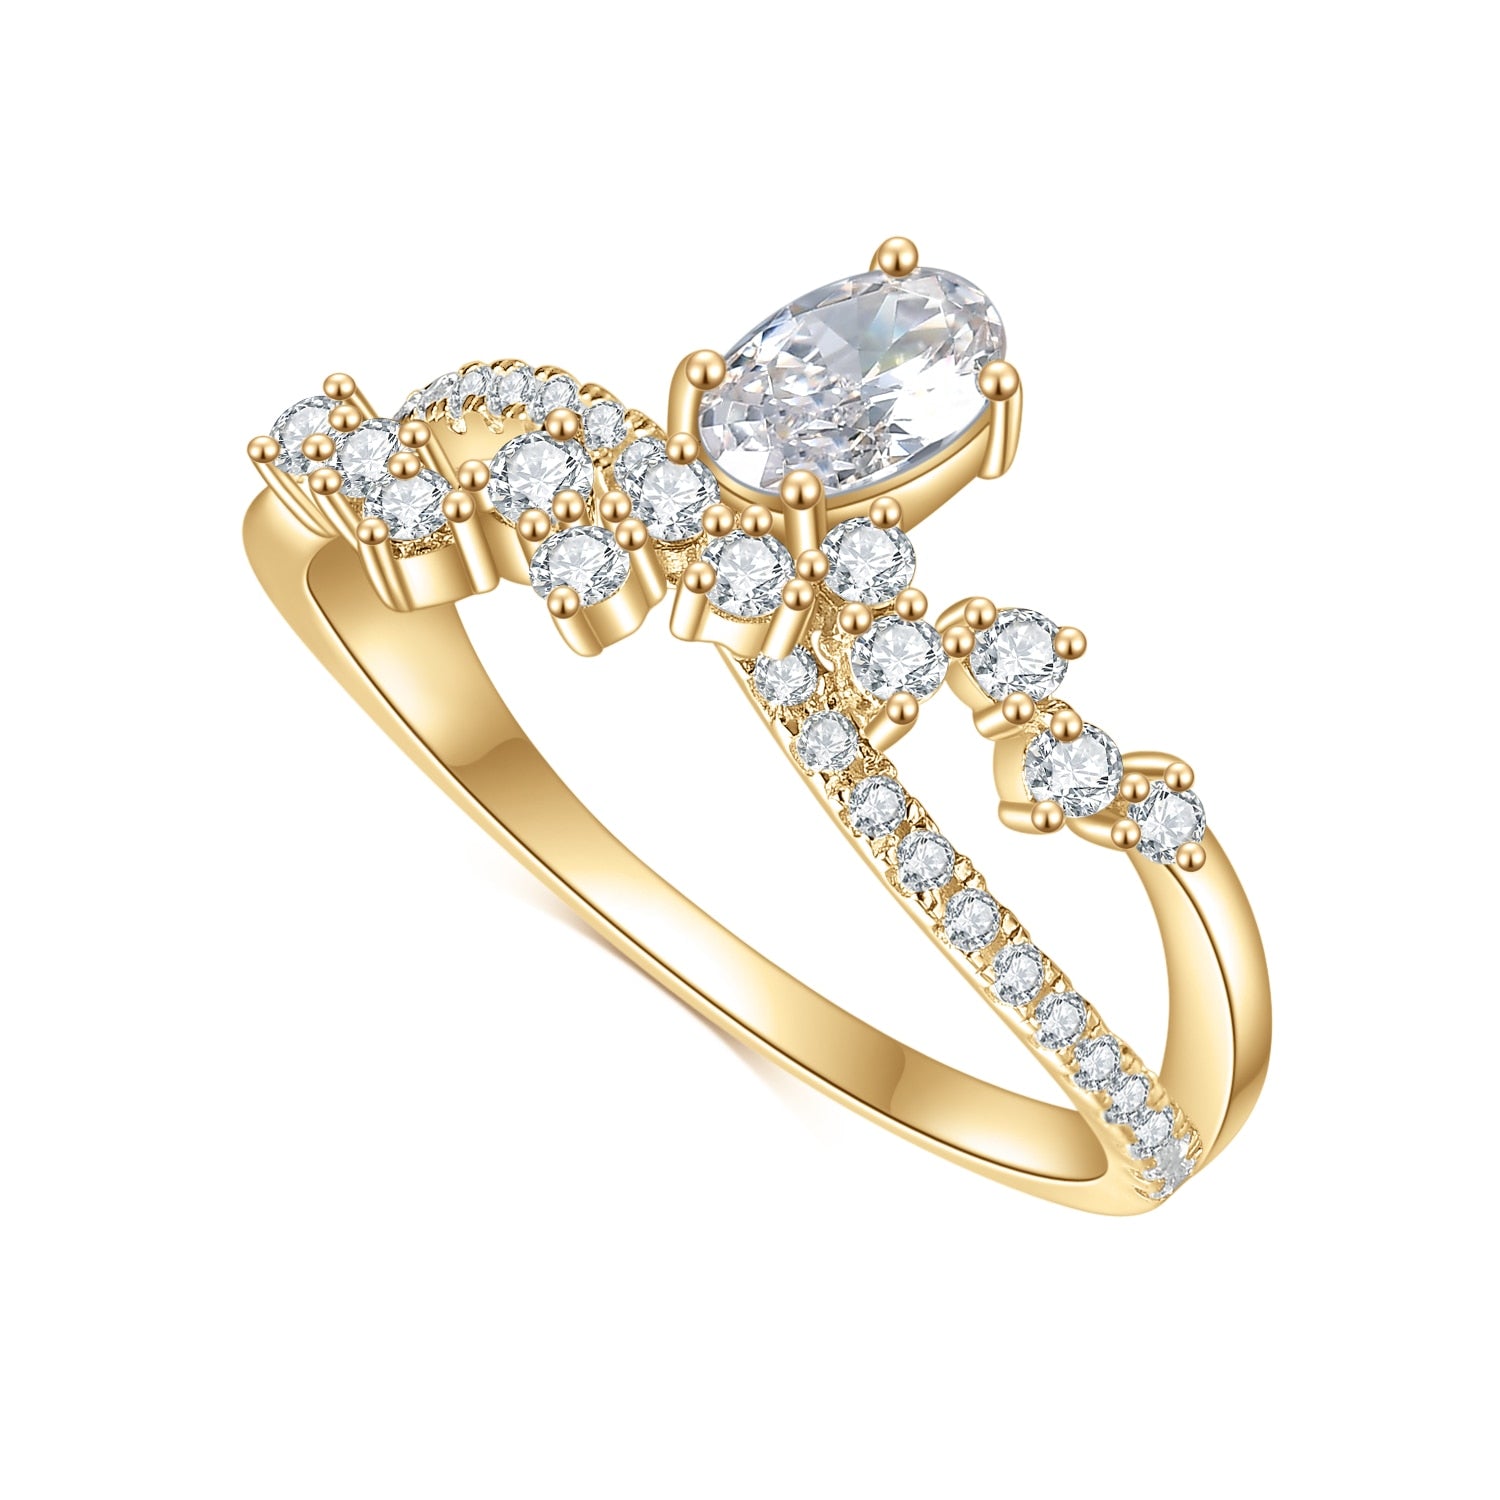 A gold asymmetrical twisted pave band ring with random sized moissanites and set with a oval moissanite.